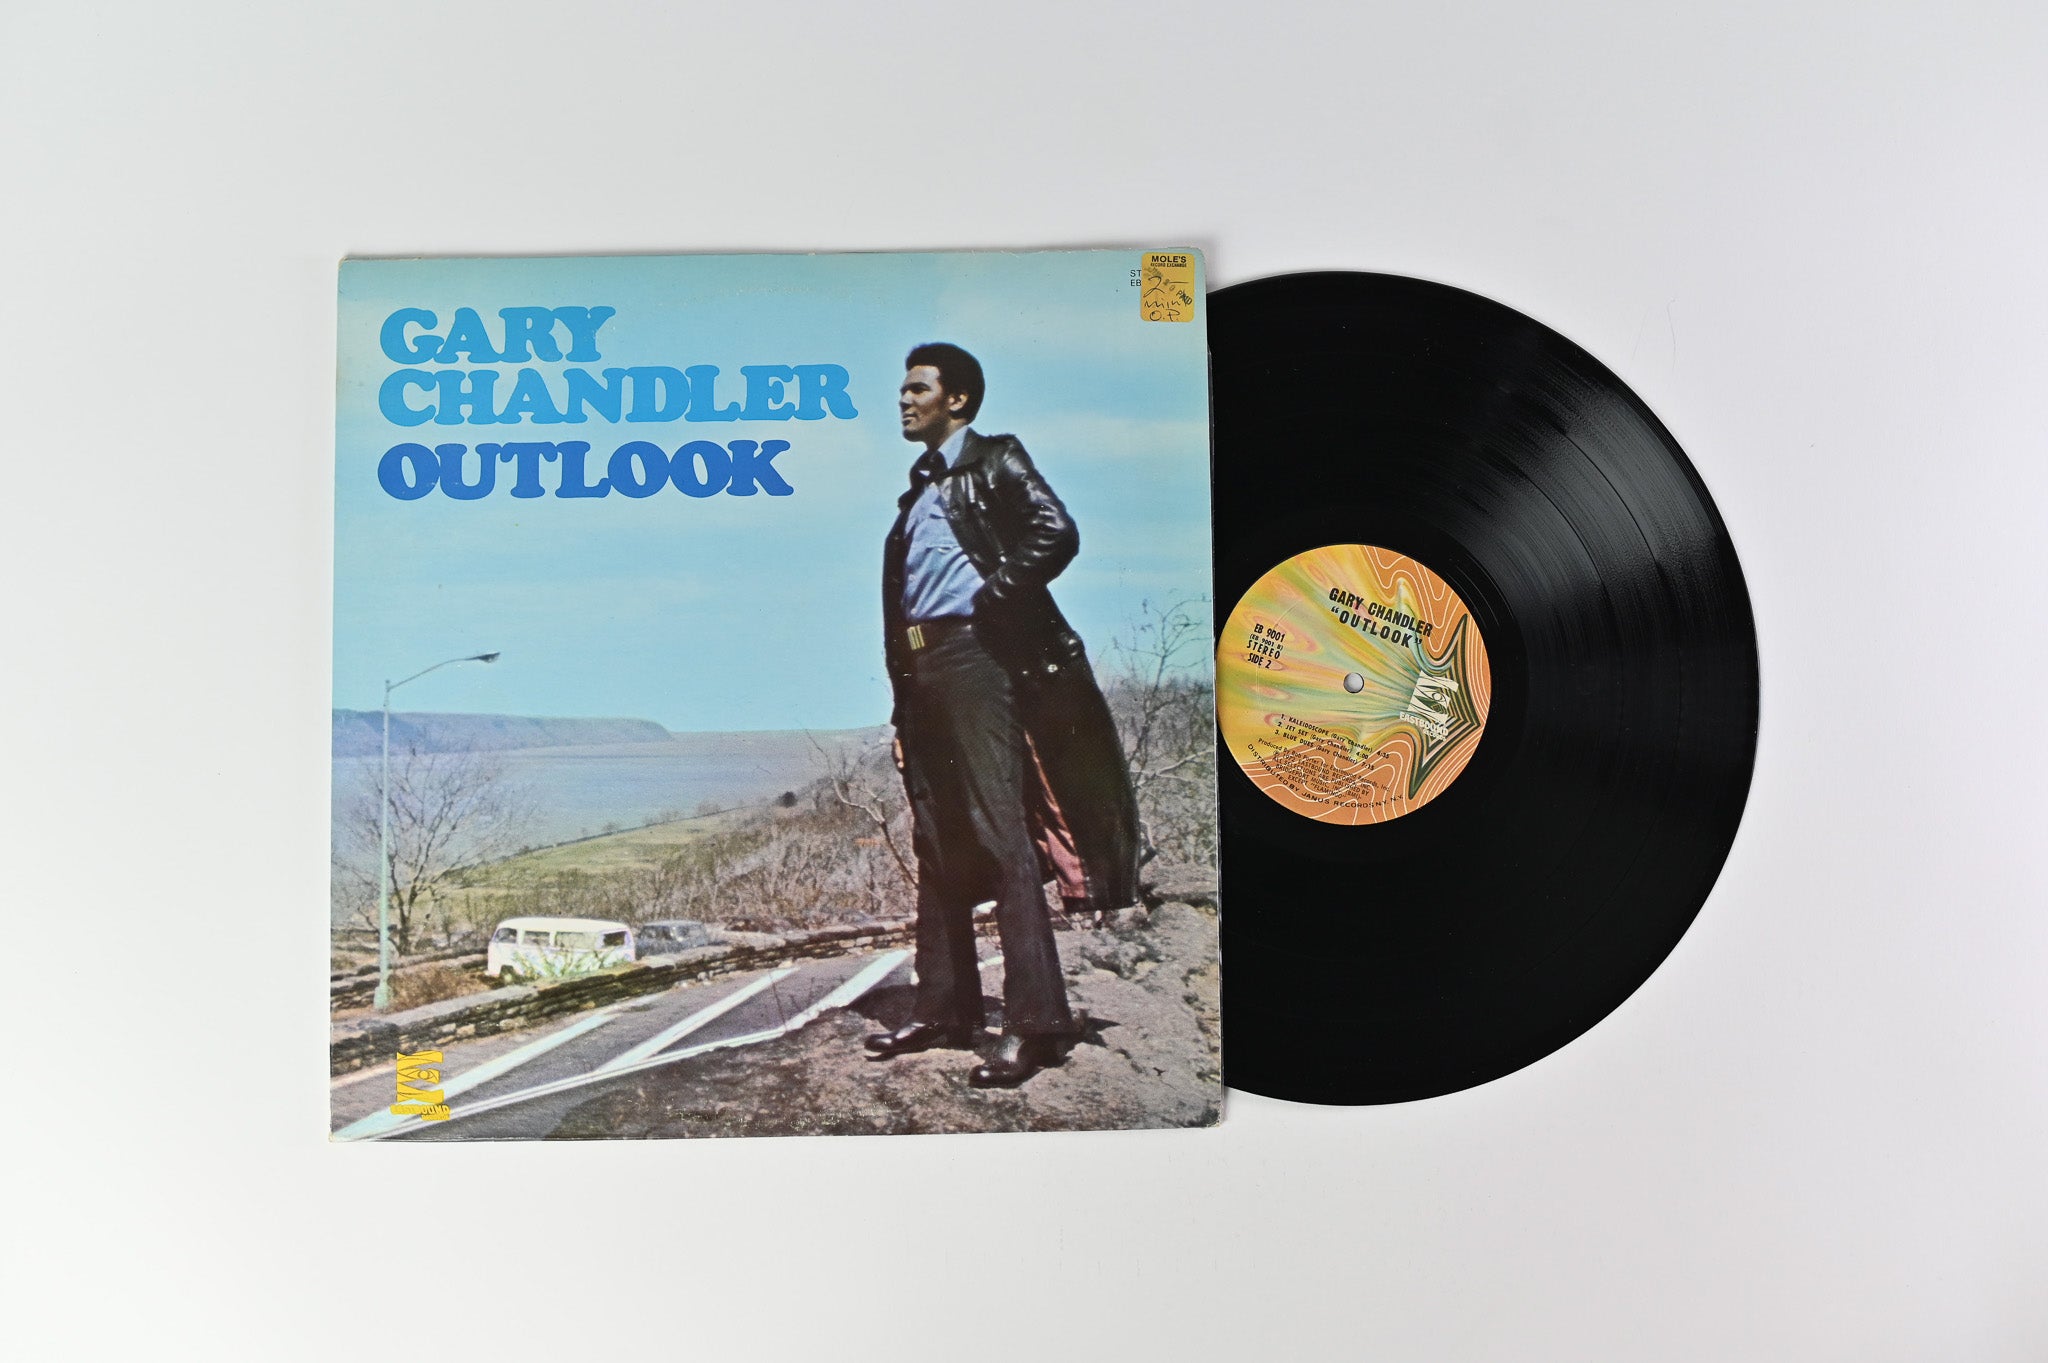 Gary Chandler - Outlook on Eastbound